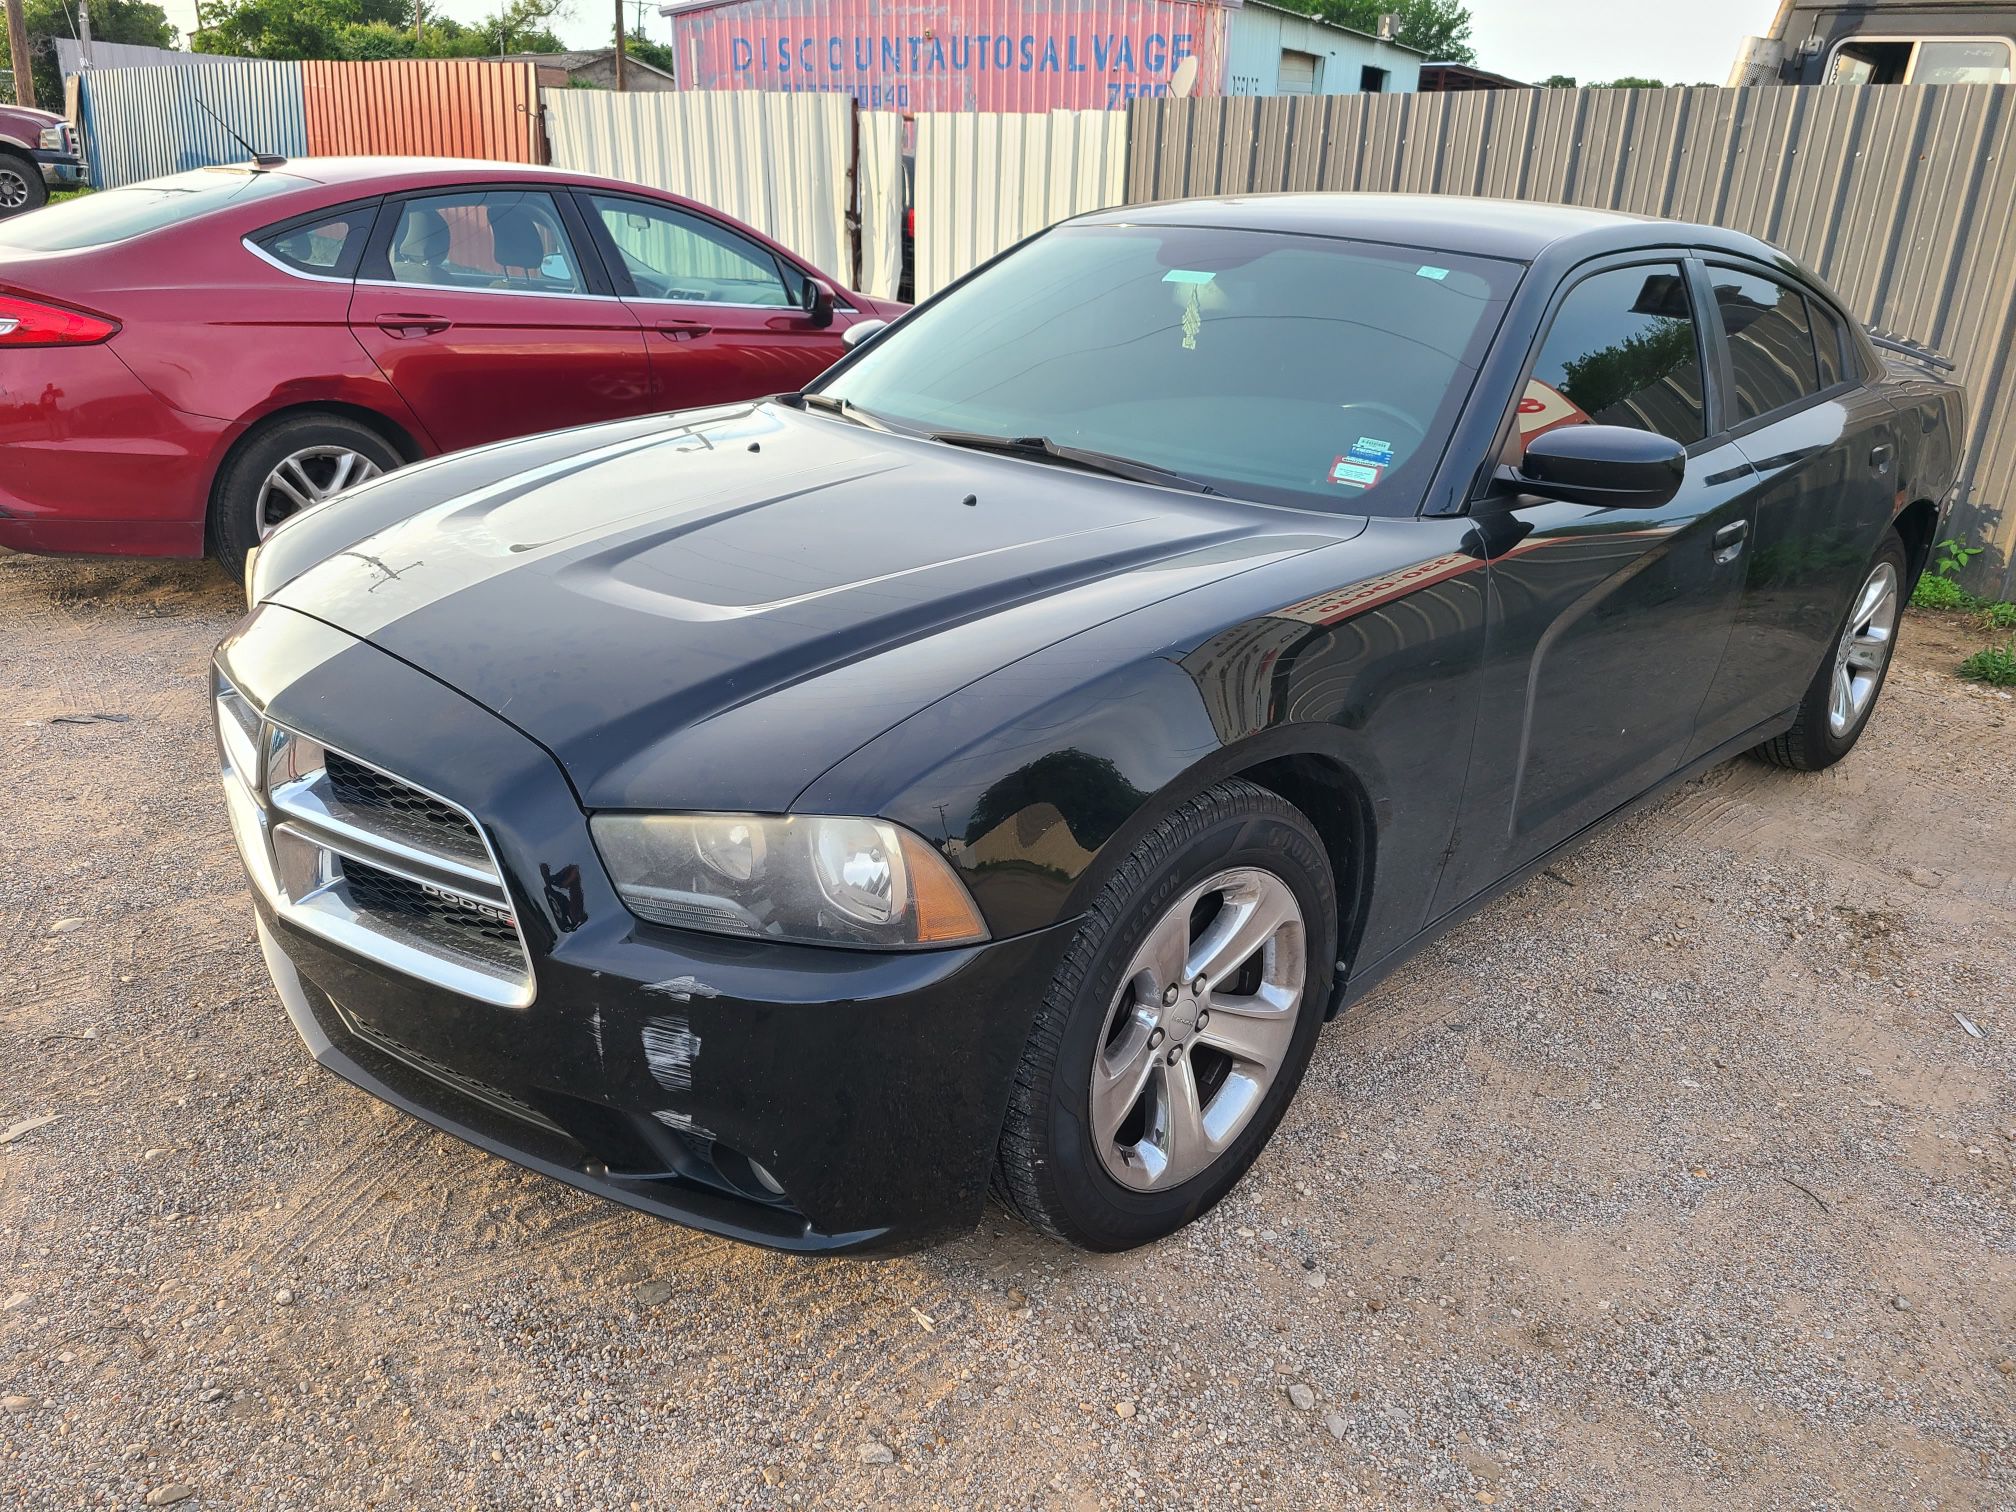 2013 Dodge Charger - Parts Only #ED6